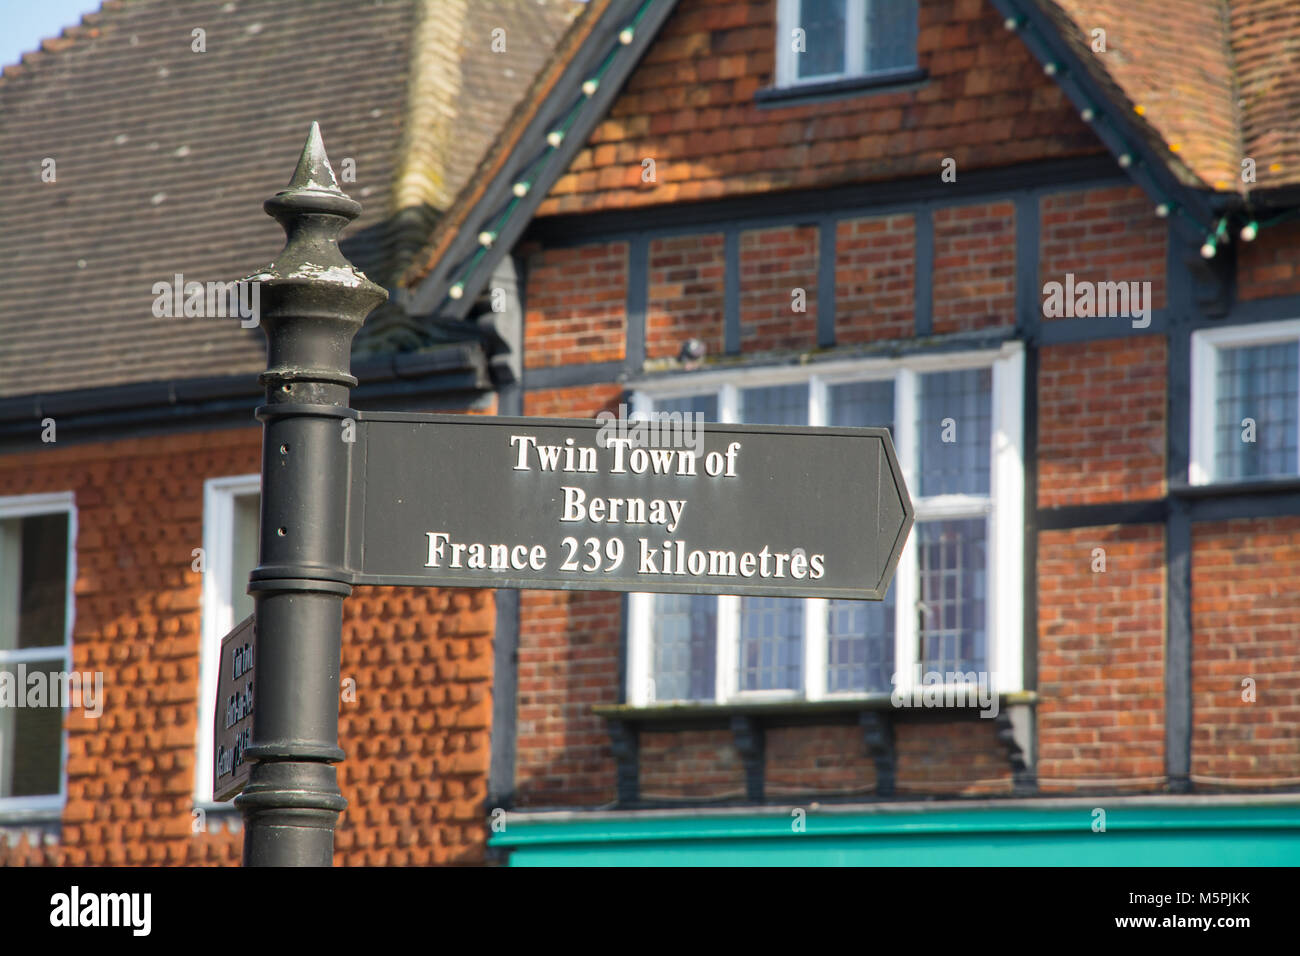 Sign in Haslemere town centre saying twin town of Bernay france 239 kilometres Stock Photo